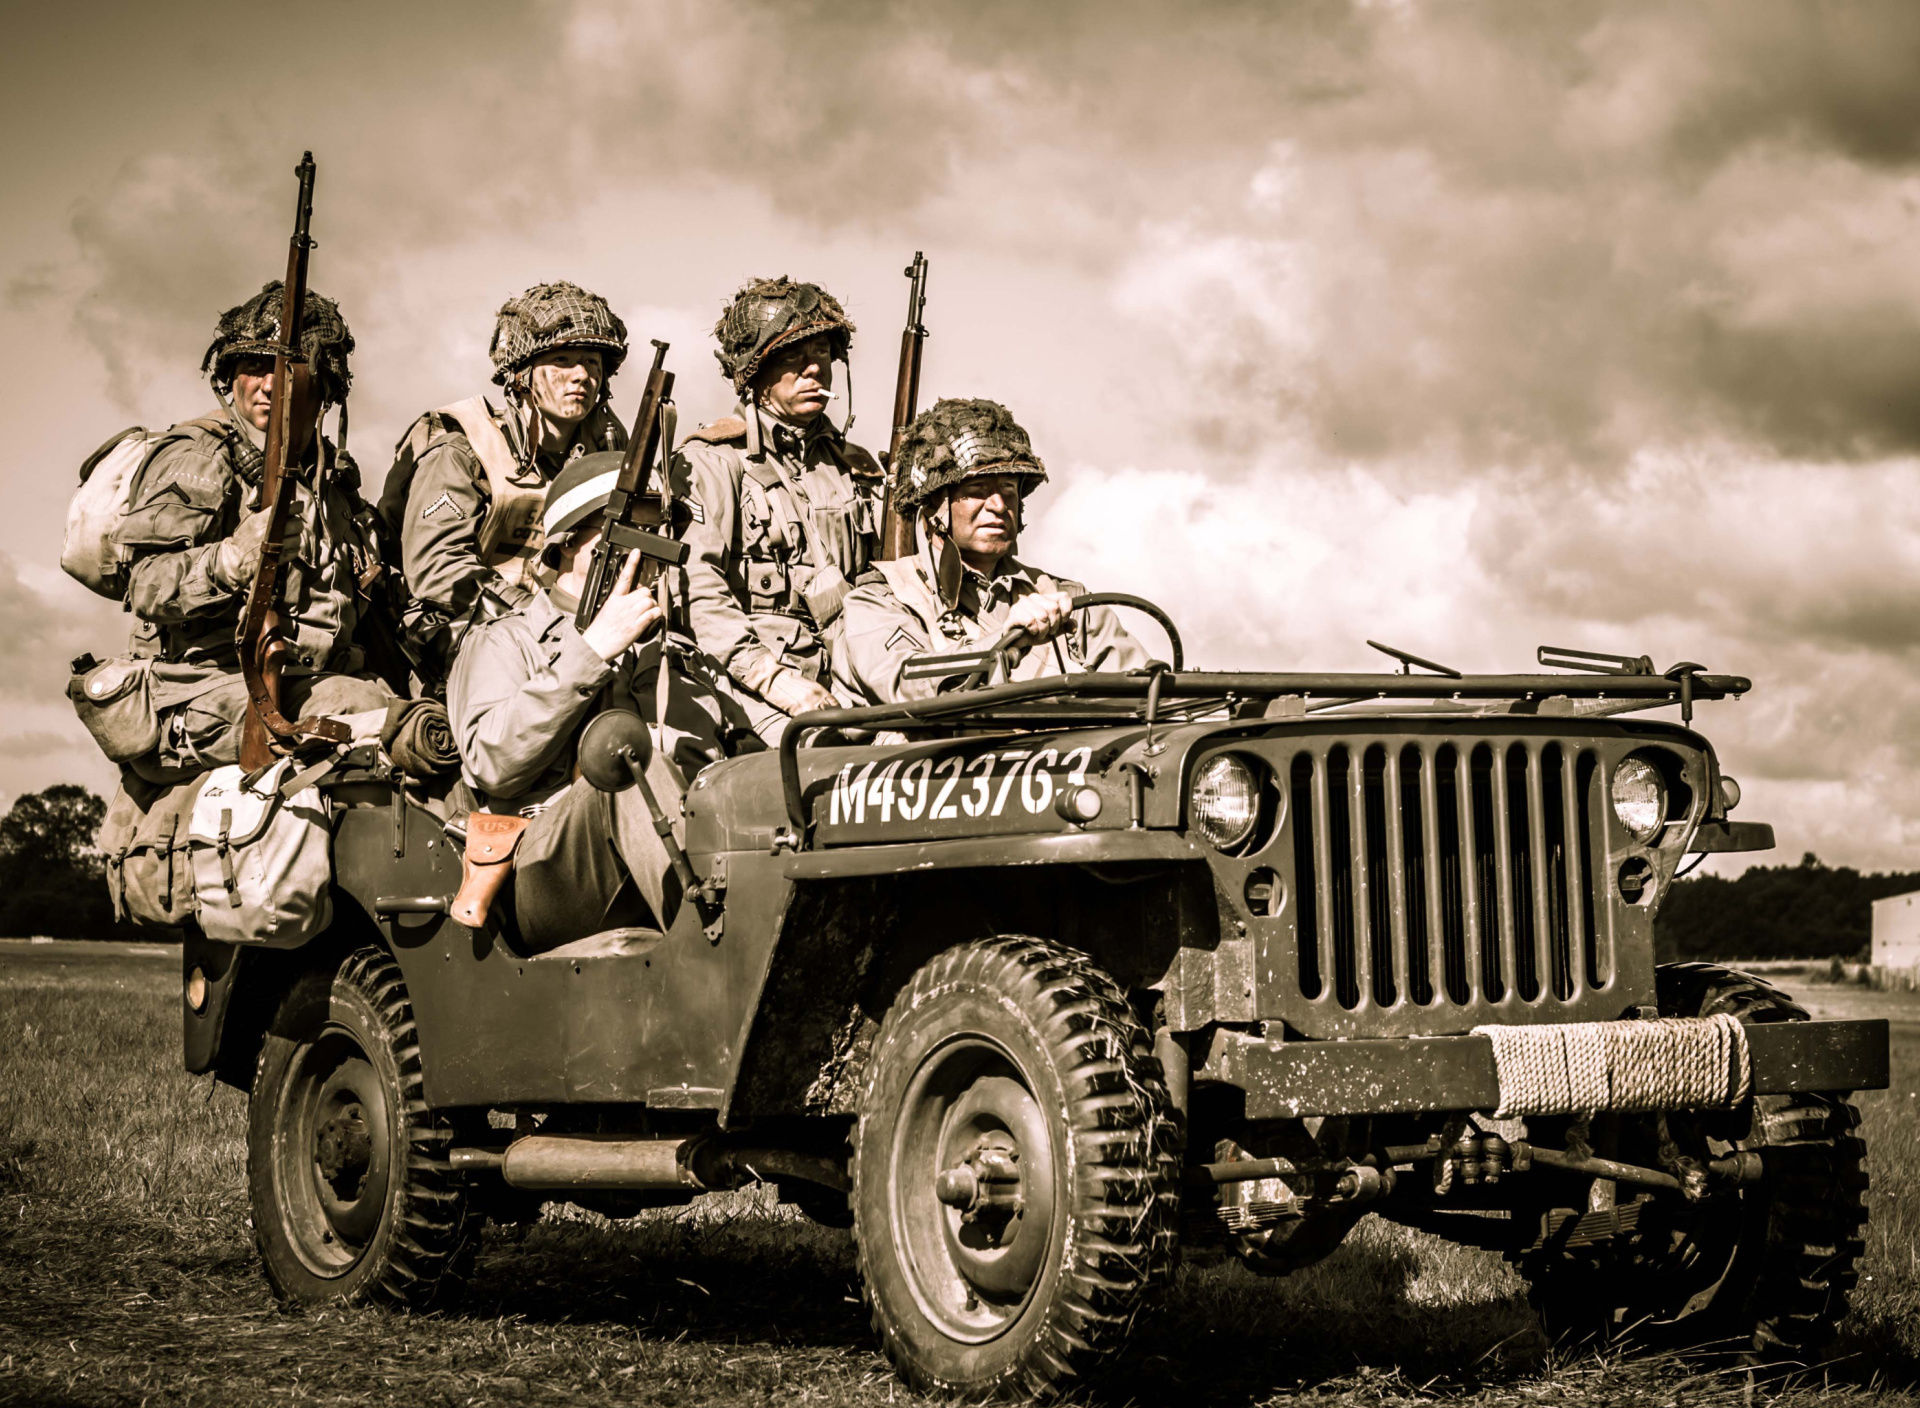 Soldiers on Jeep wallpaper 1920x1408